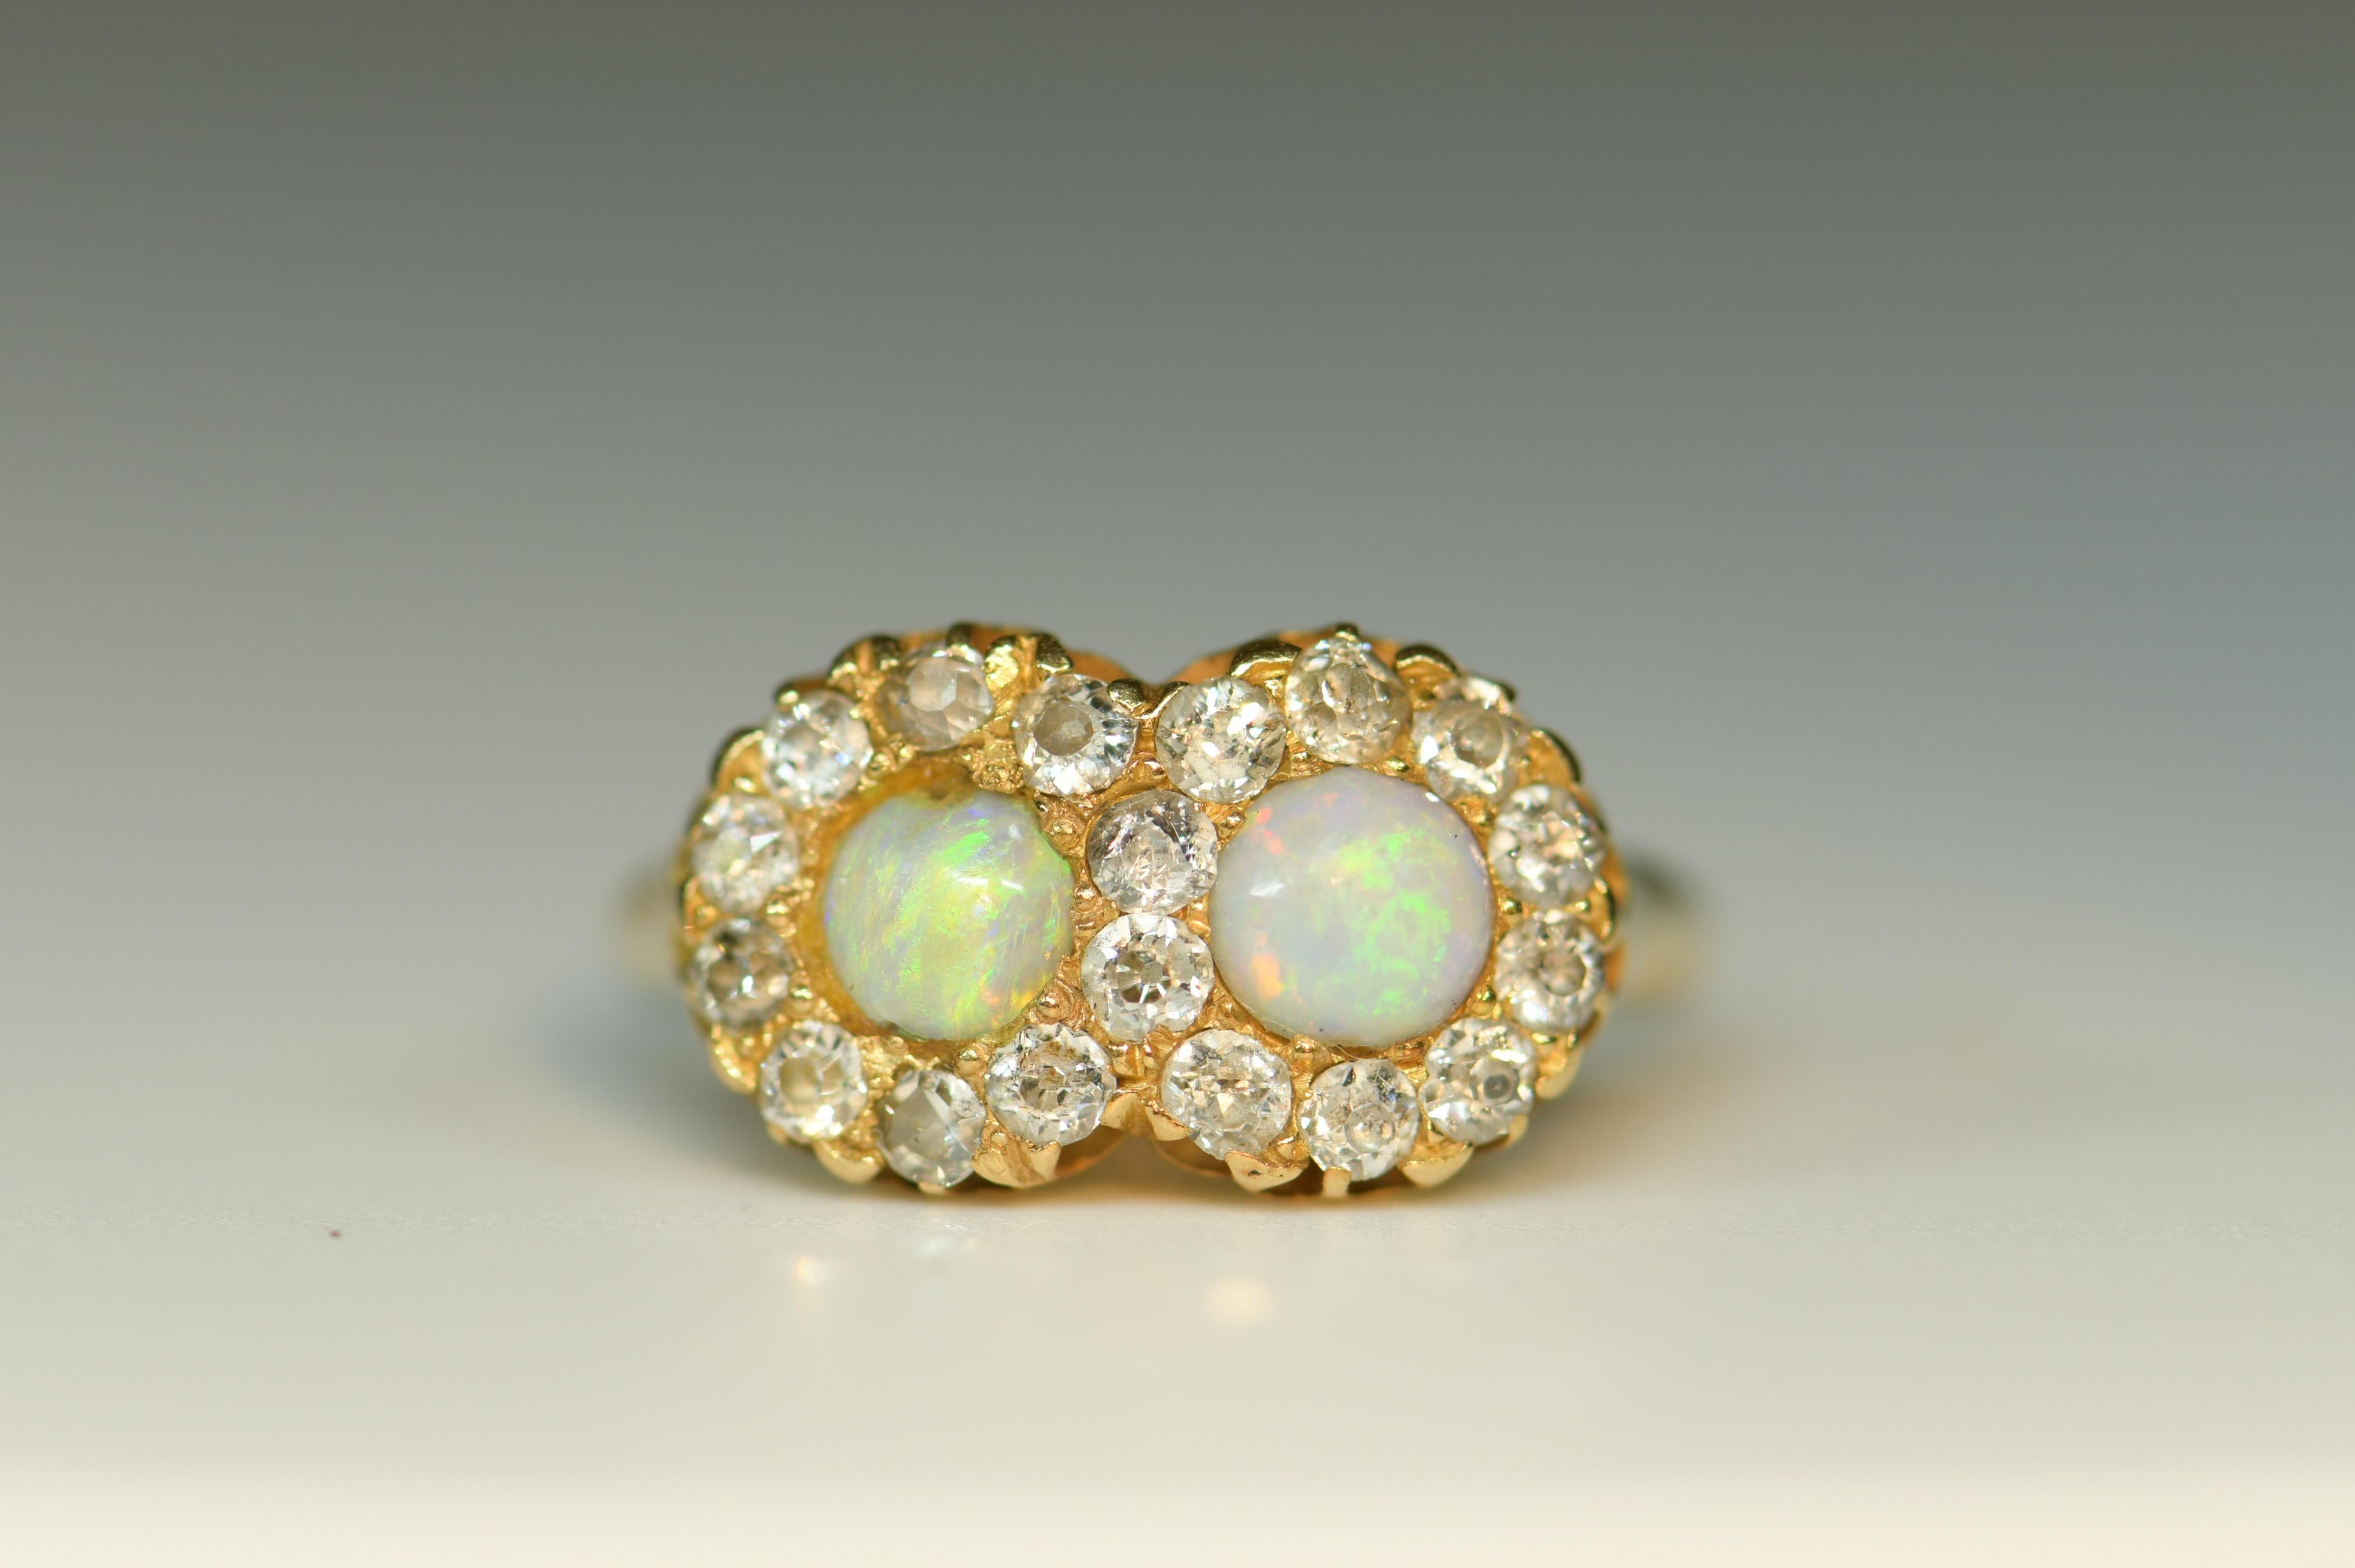 This is a Victorian-era 1880 beautiful double opal ring. Crafted in 18 karat gold. The two opals of approx 4mm are surrounded with old cut diamonds to an estimated approx combined total of 0.45cts.

Opal is a delicate stone with fine but vibrant